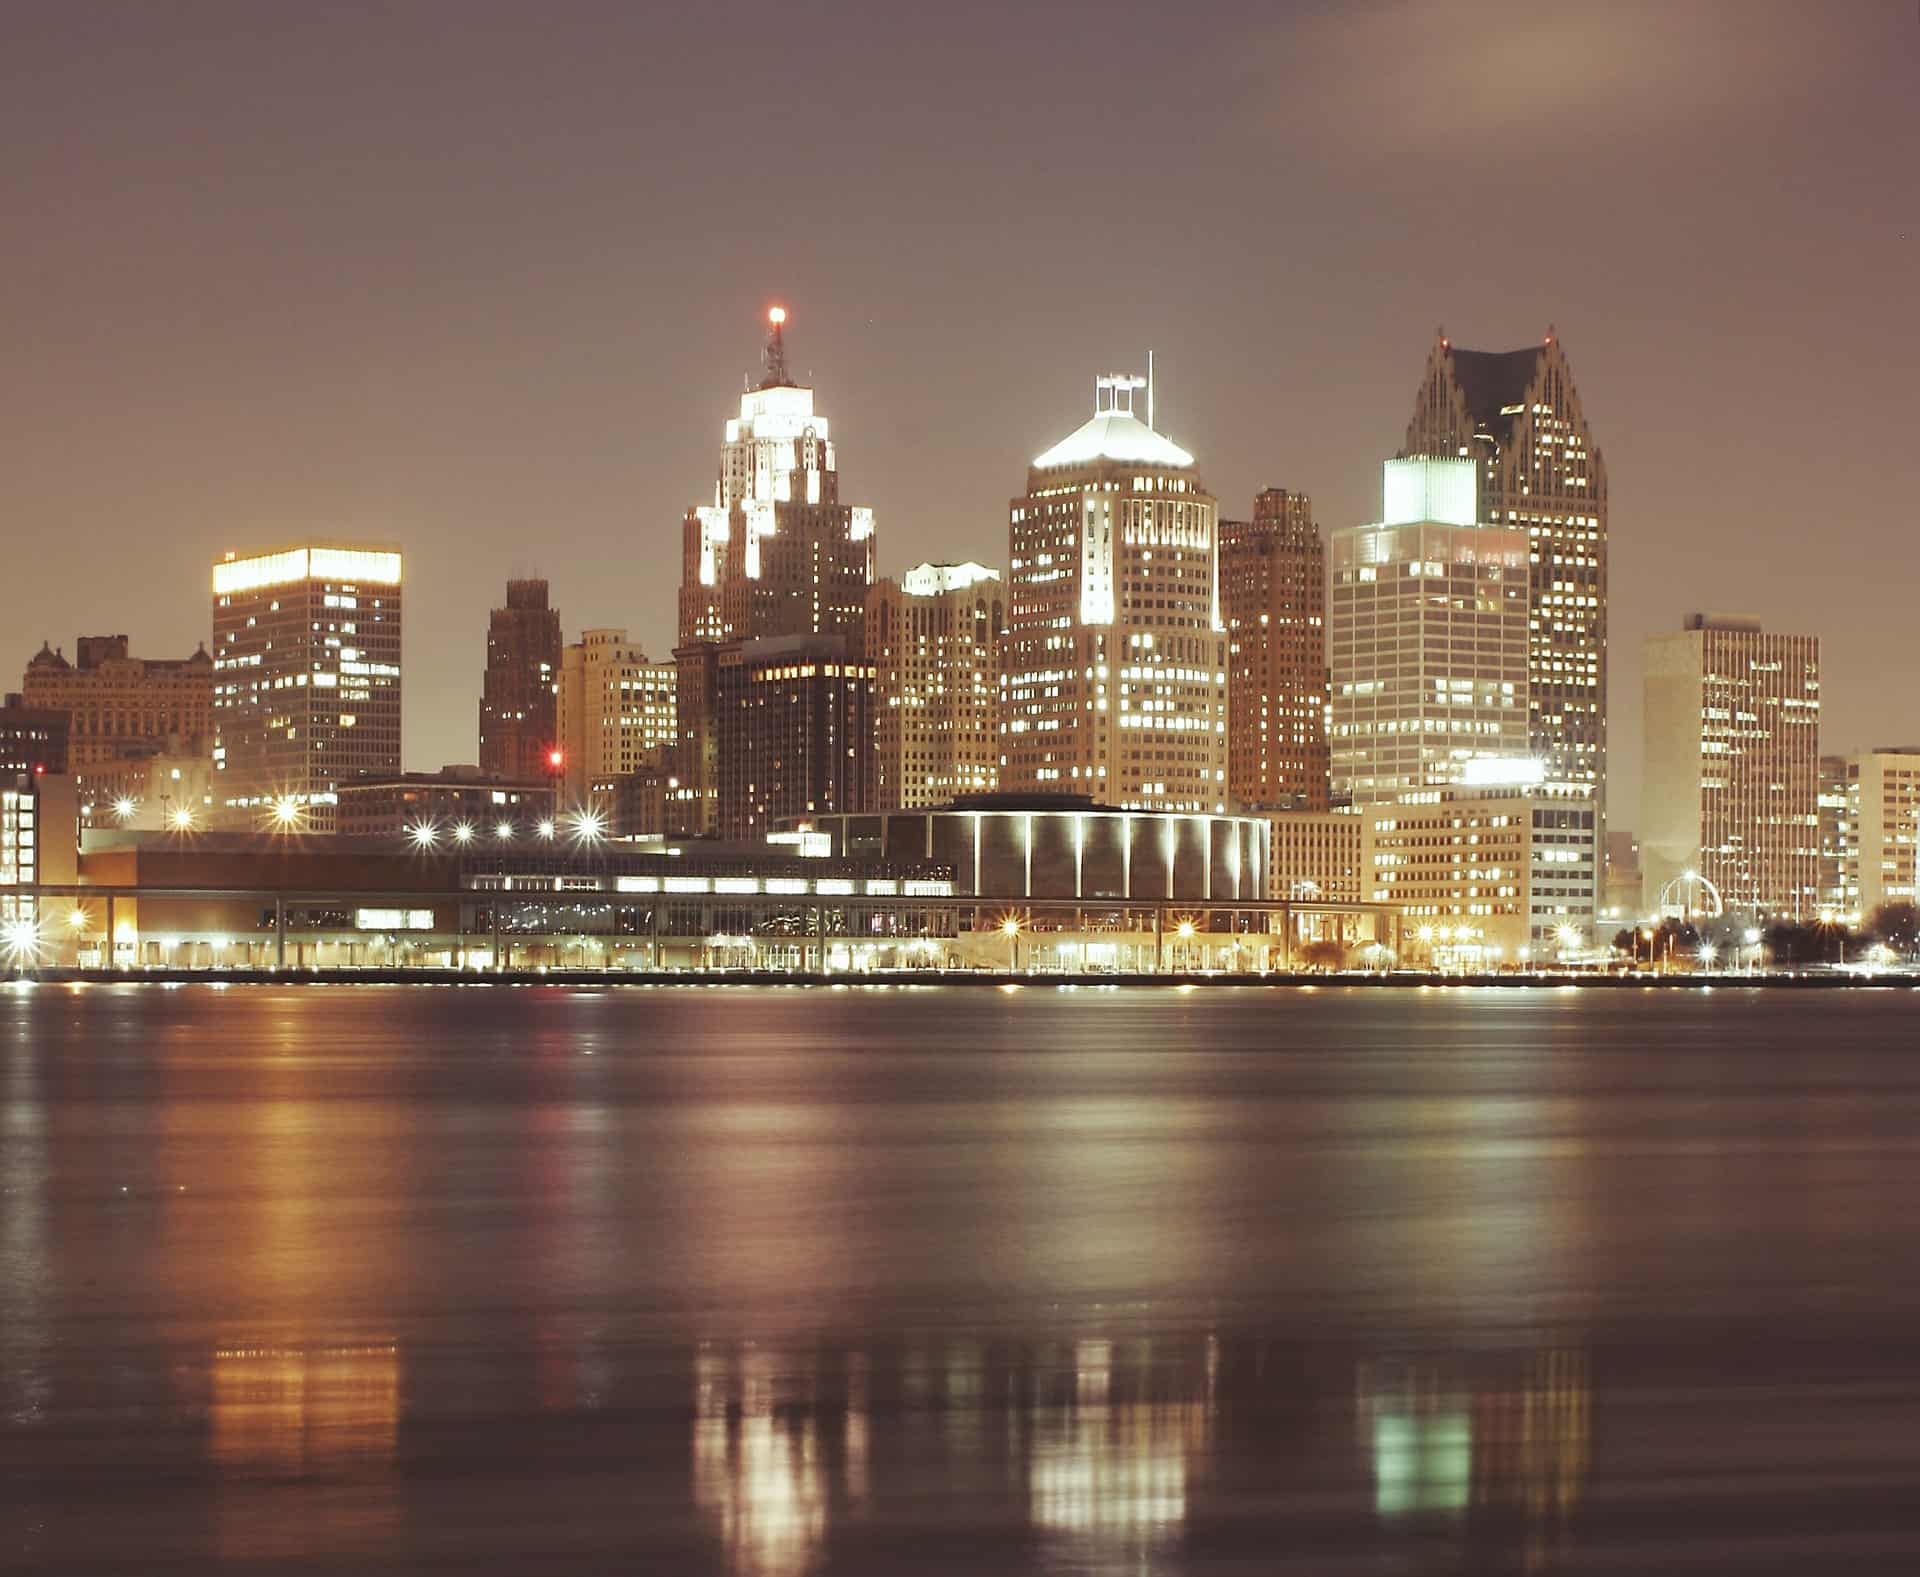 Best things to do in Detroit Michigan Andy Hill detroit-406894_1920 LEEROY Agency on Pixabay